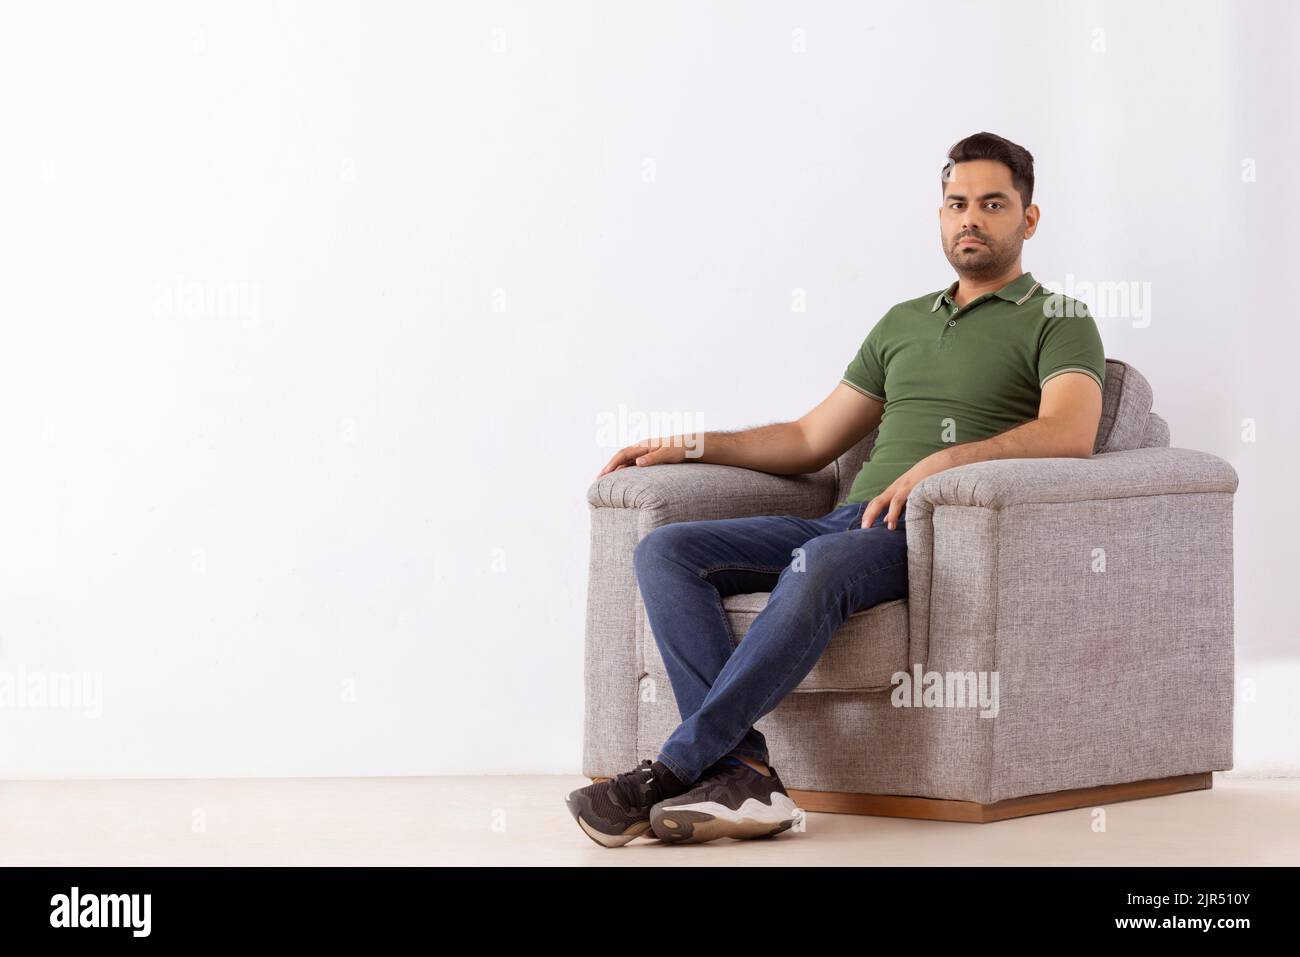 Portrait of young man looking at camera while sitting on sofa Stock Photo